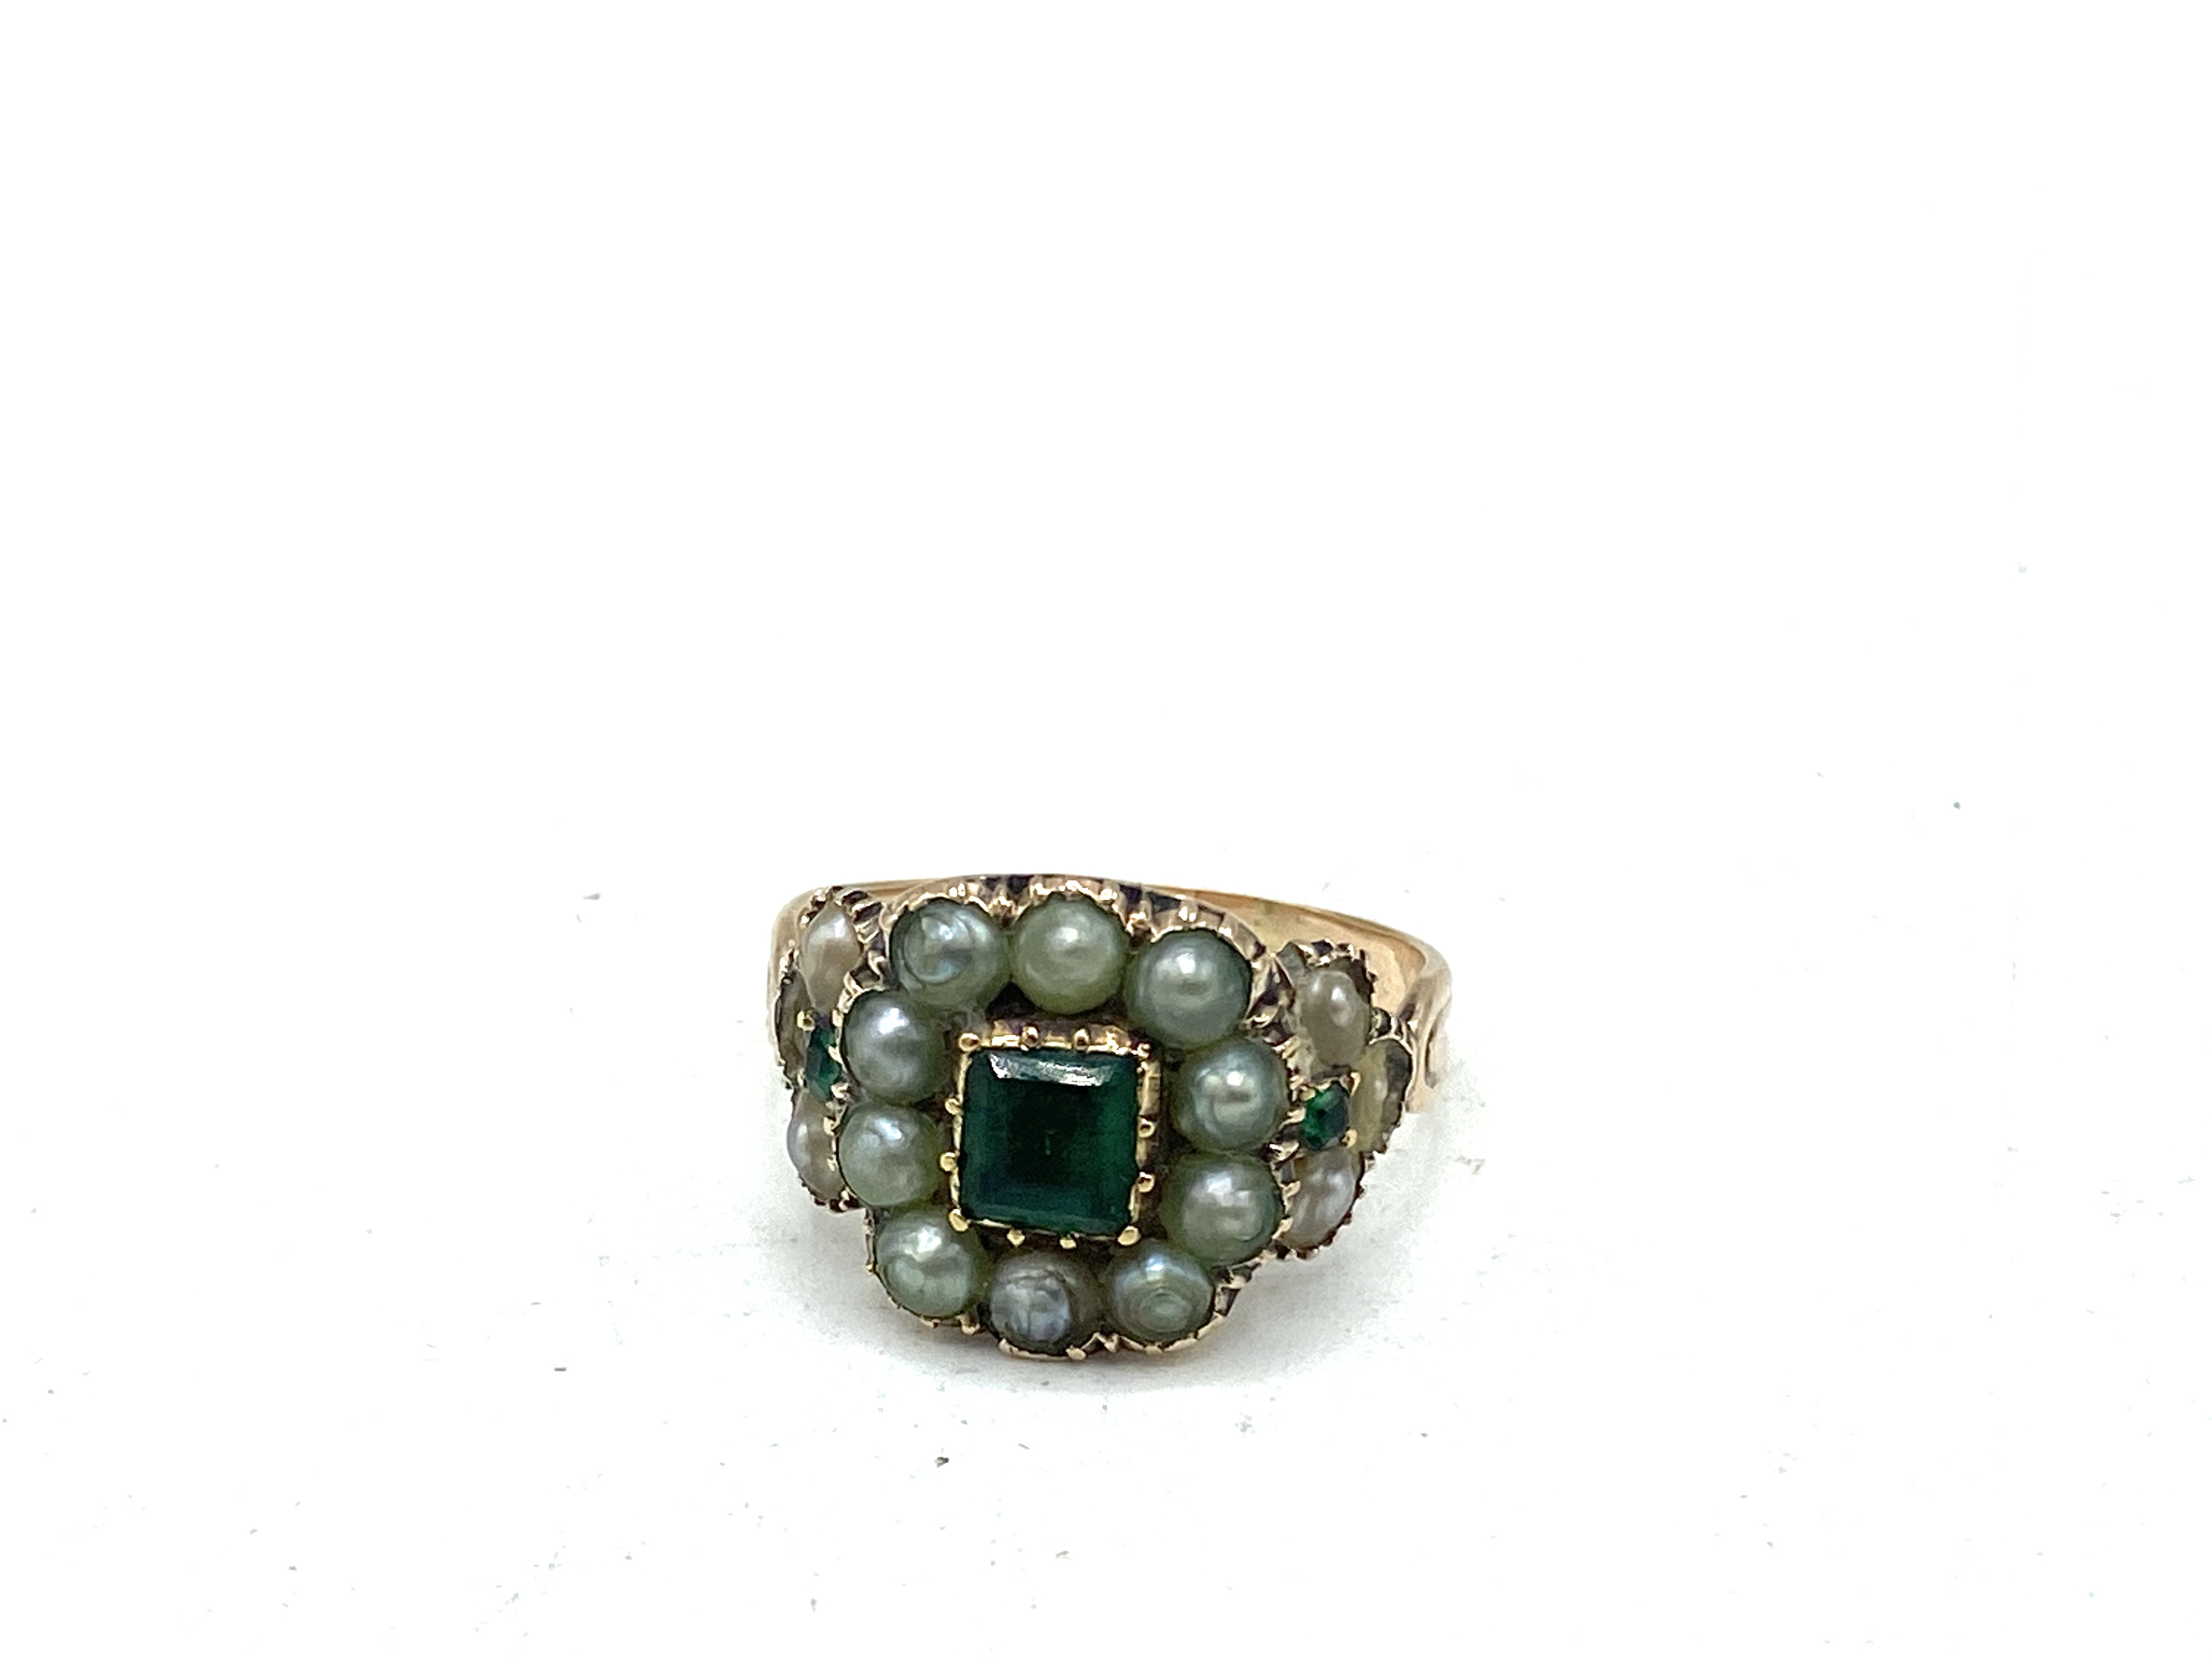 19th century emerald and pearl ring - Image 6 of 8